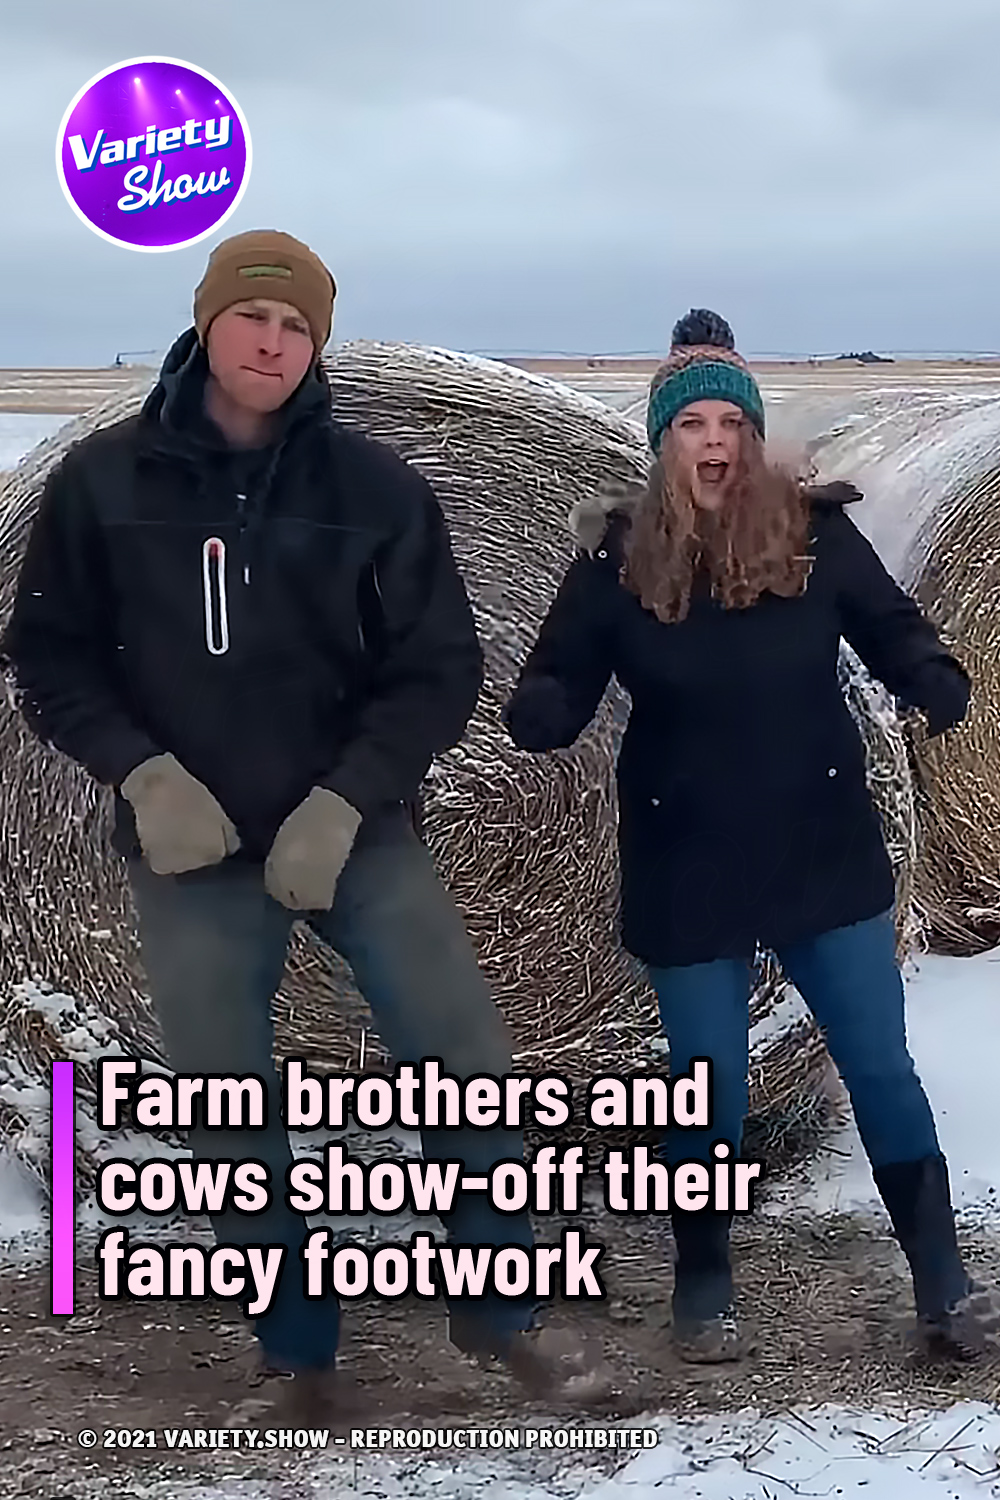 Farm brothers and cows show-off their fancy footwork